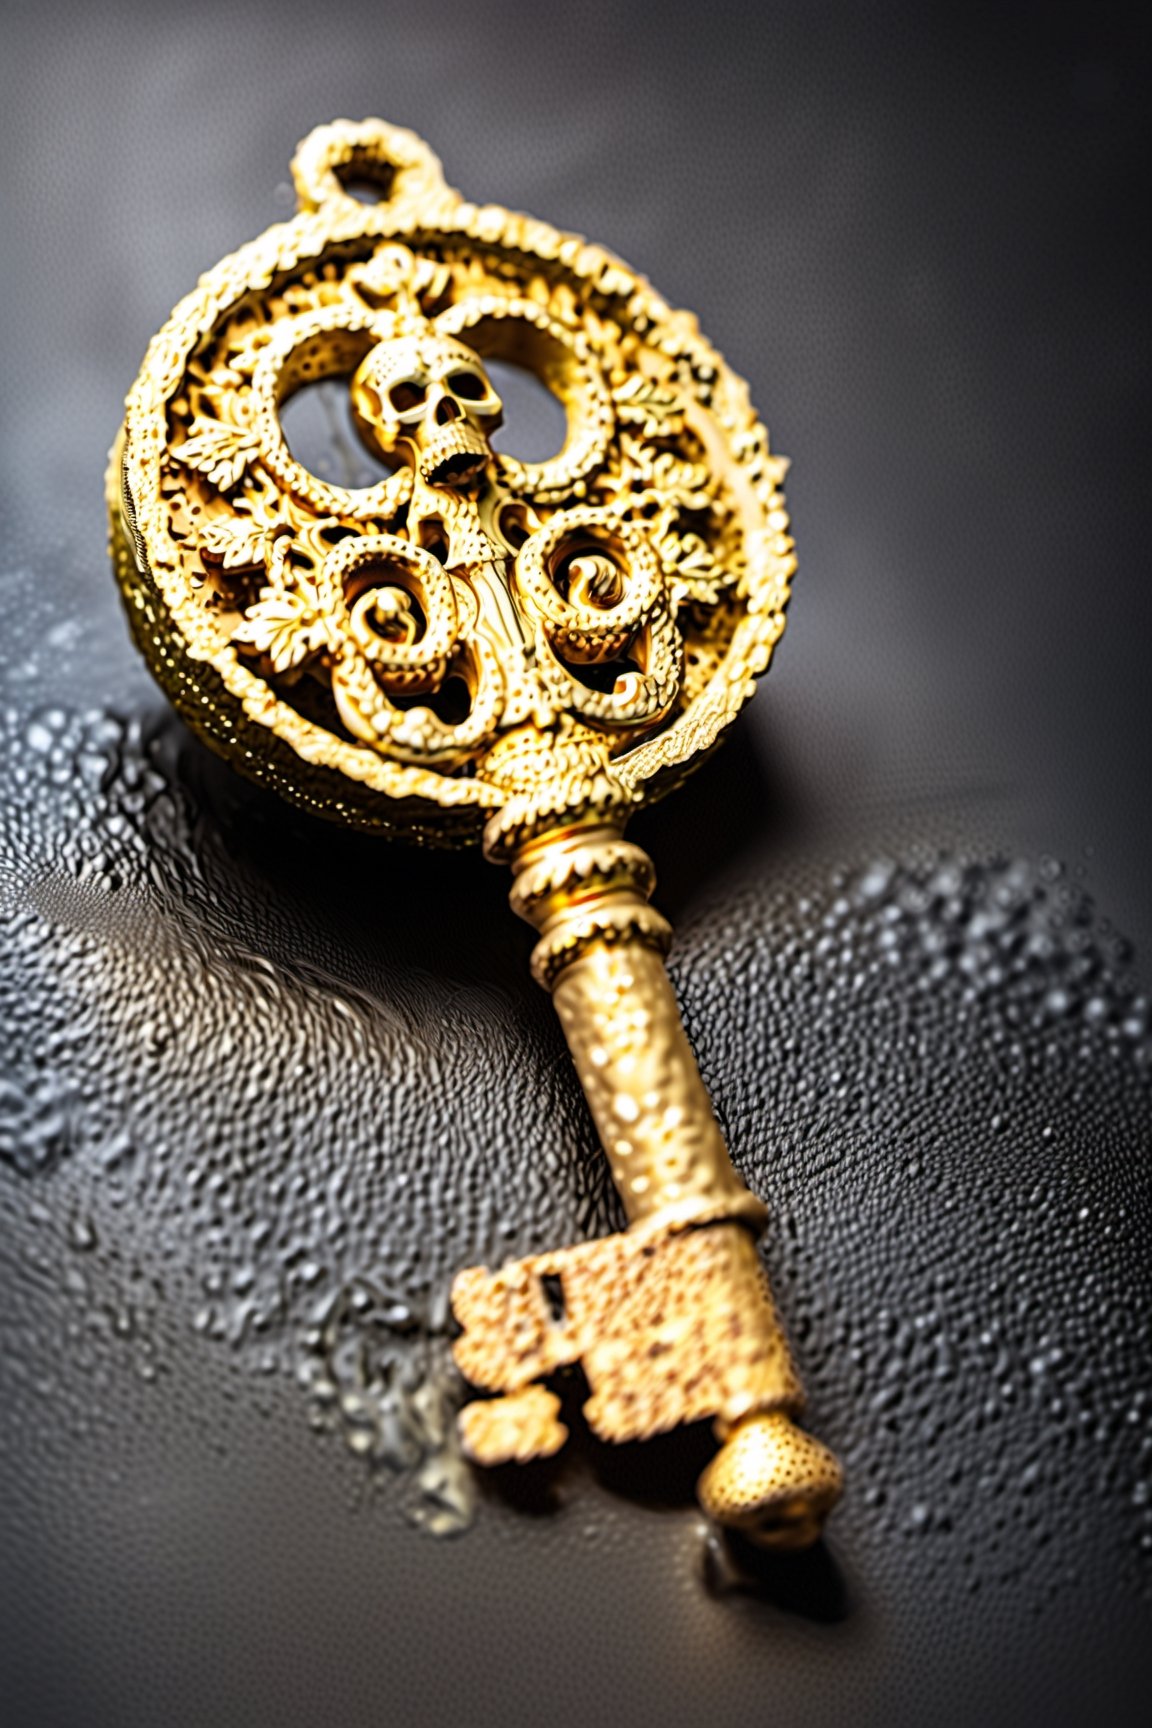 A melting gold Skeleton Key in front of a black rubber background. The key should be marvelous in gold color, detailed, worn, with scratches to enhance the worn look. The background should be made of rubber like a tire. with grooves and details to capture the eye. Raw photo,Ultra realistic 